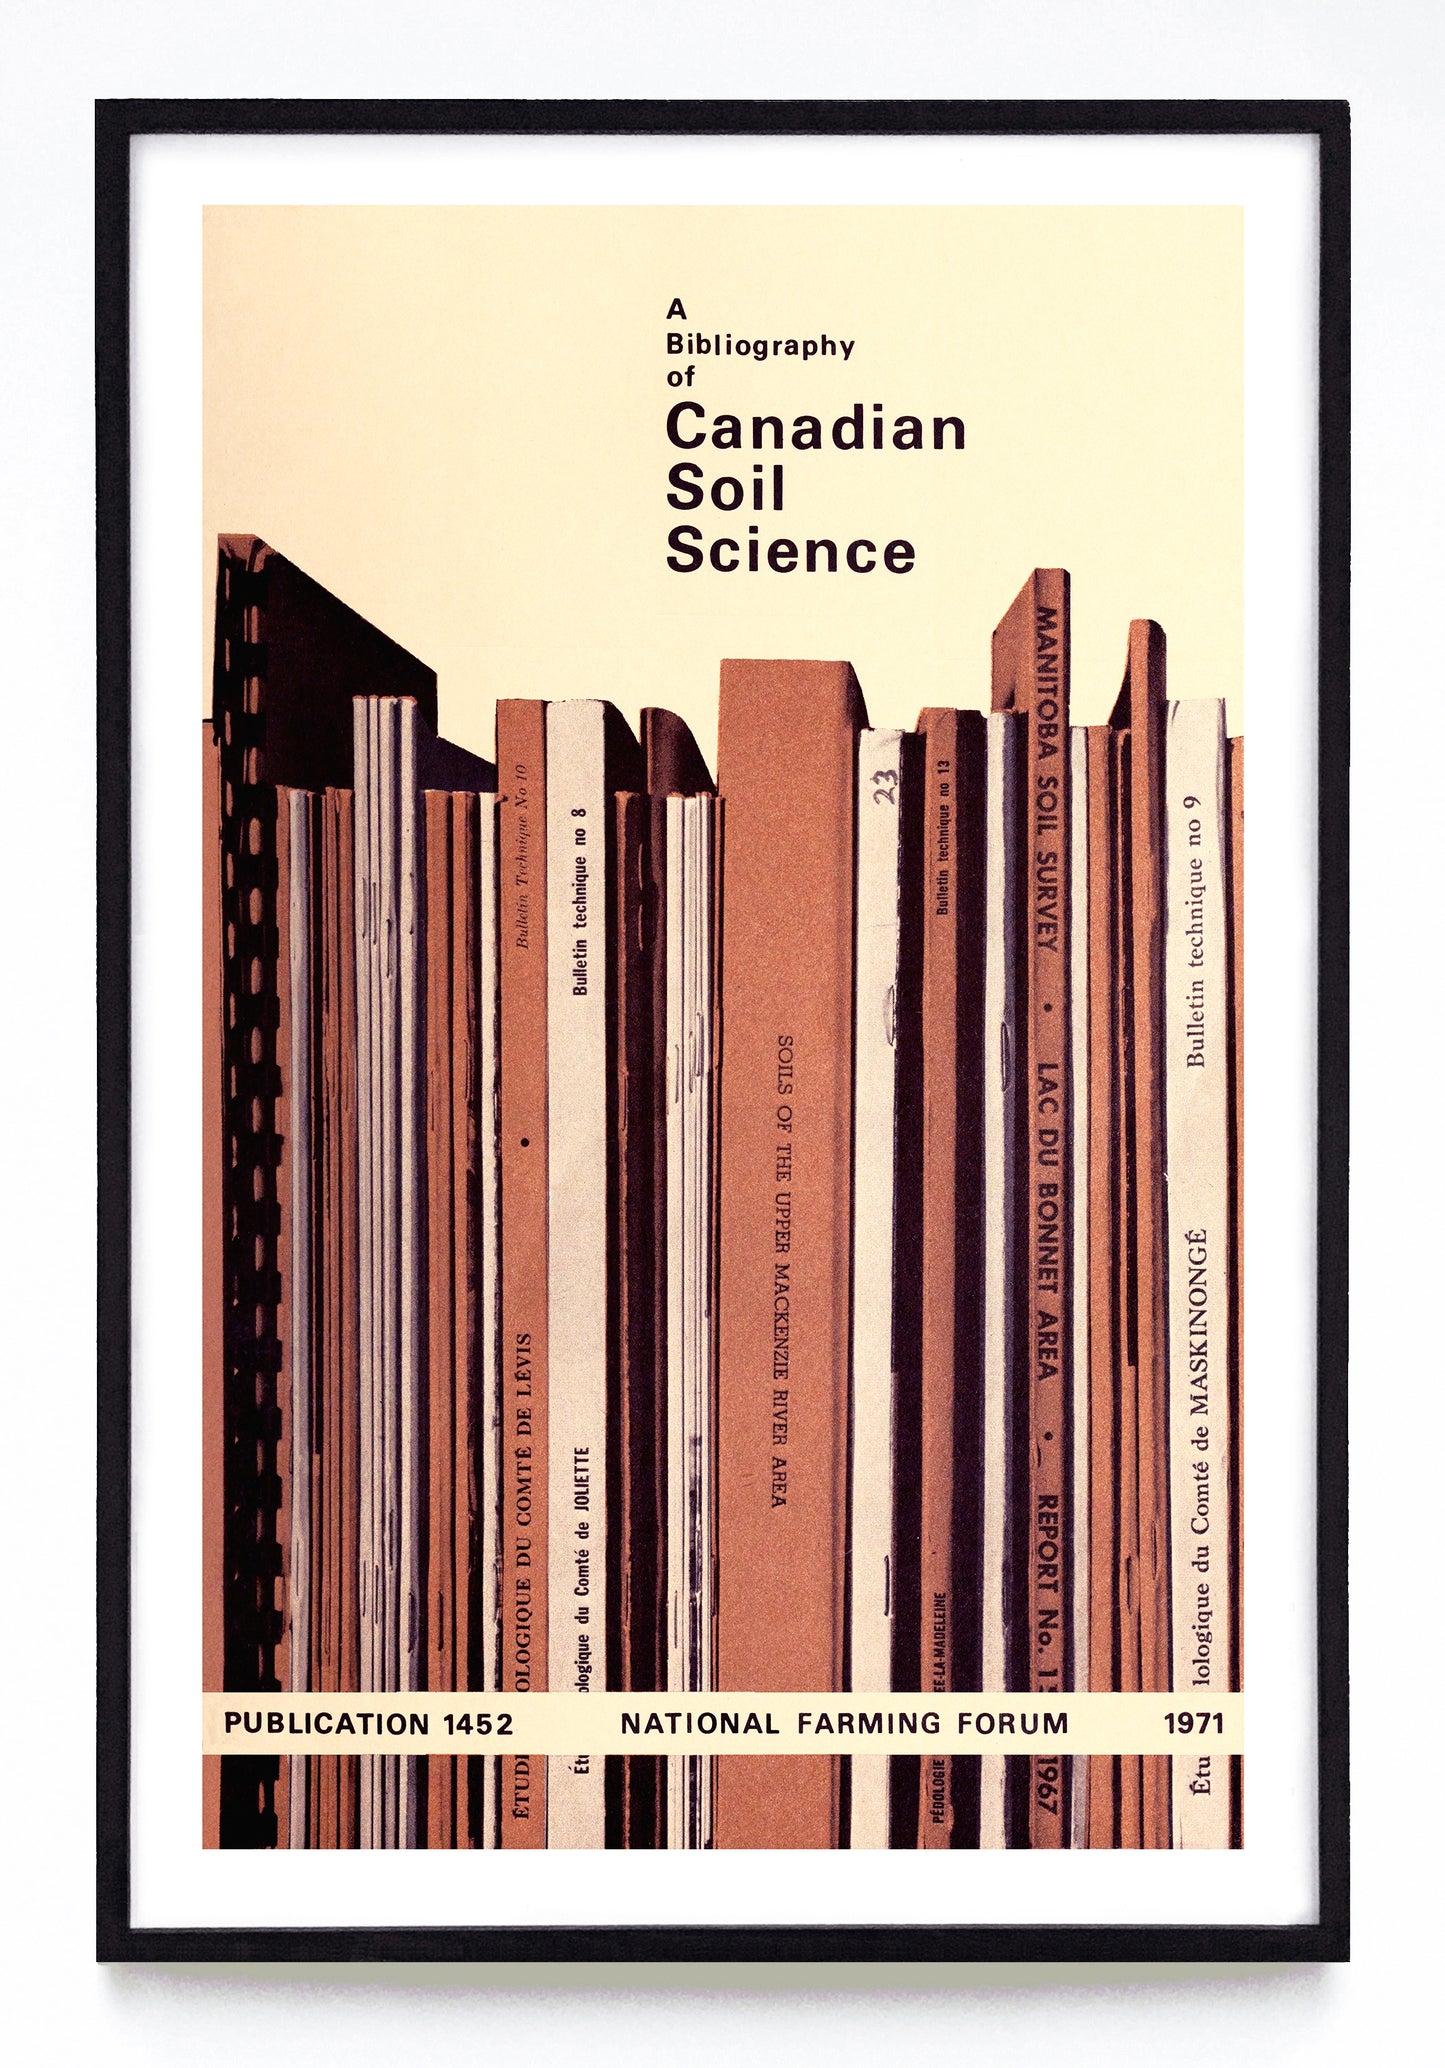 "A Bibliography of Canadian Soil Science" print (1971)